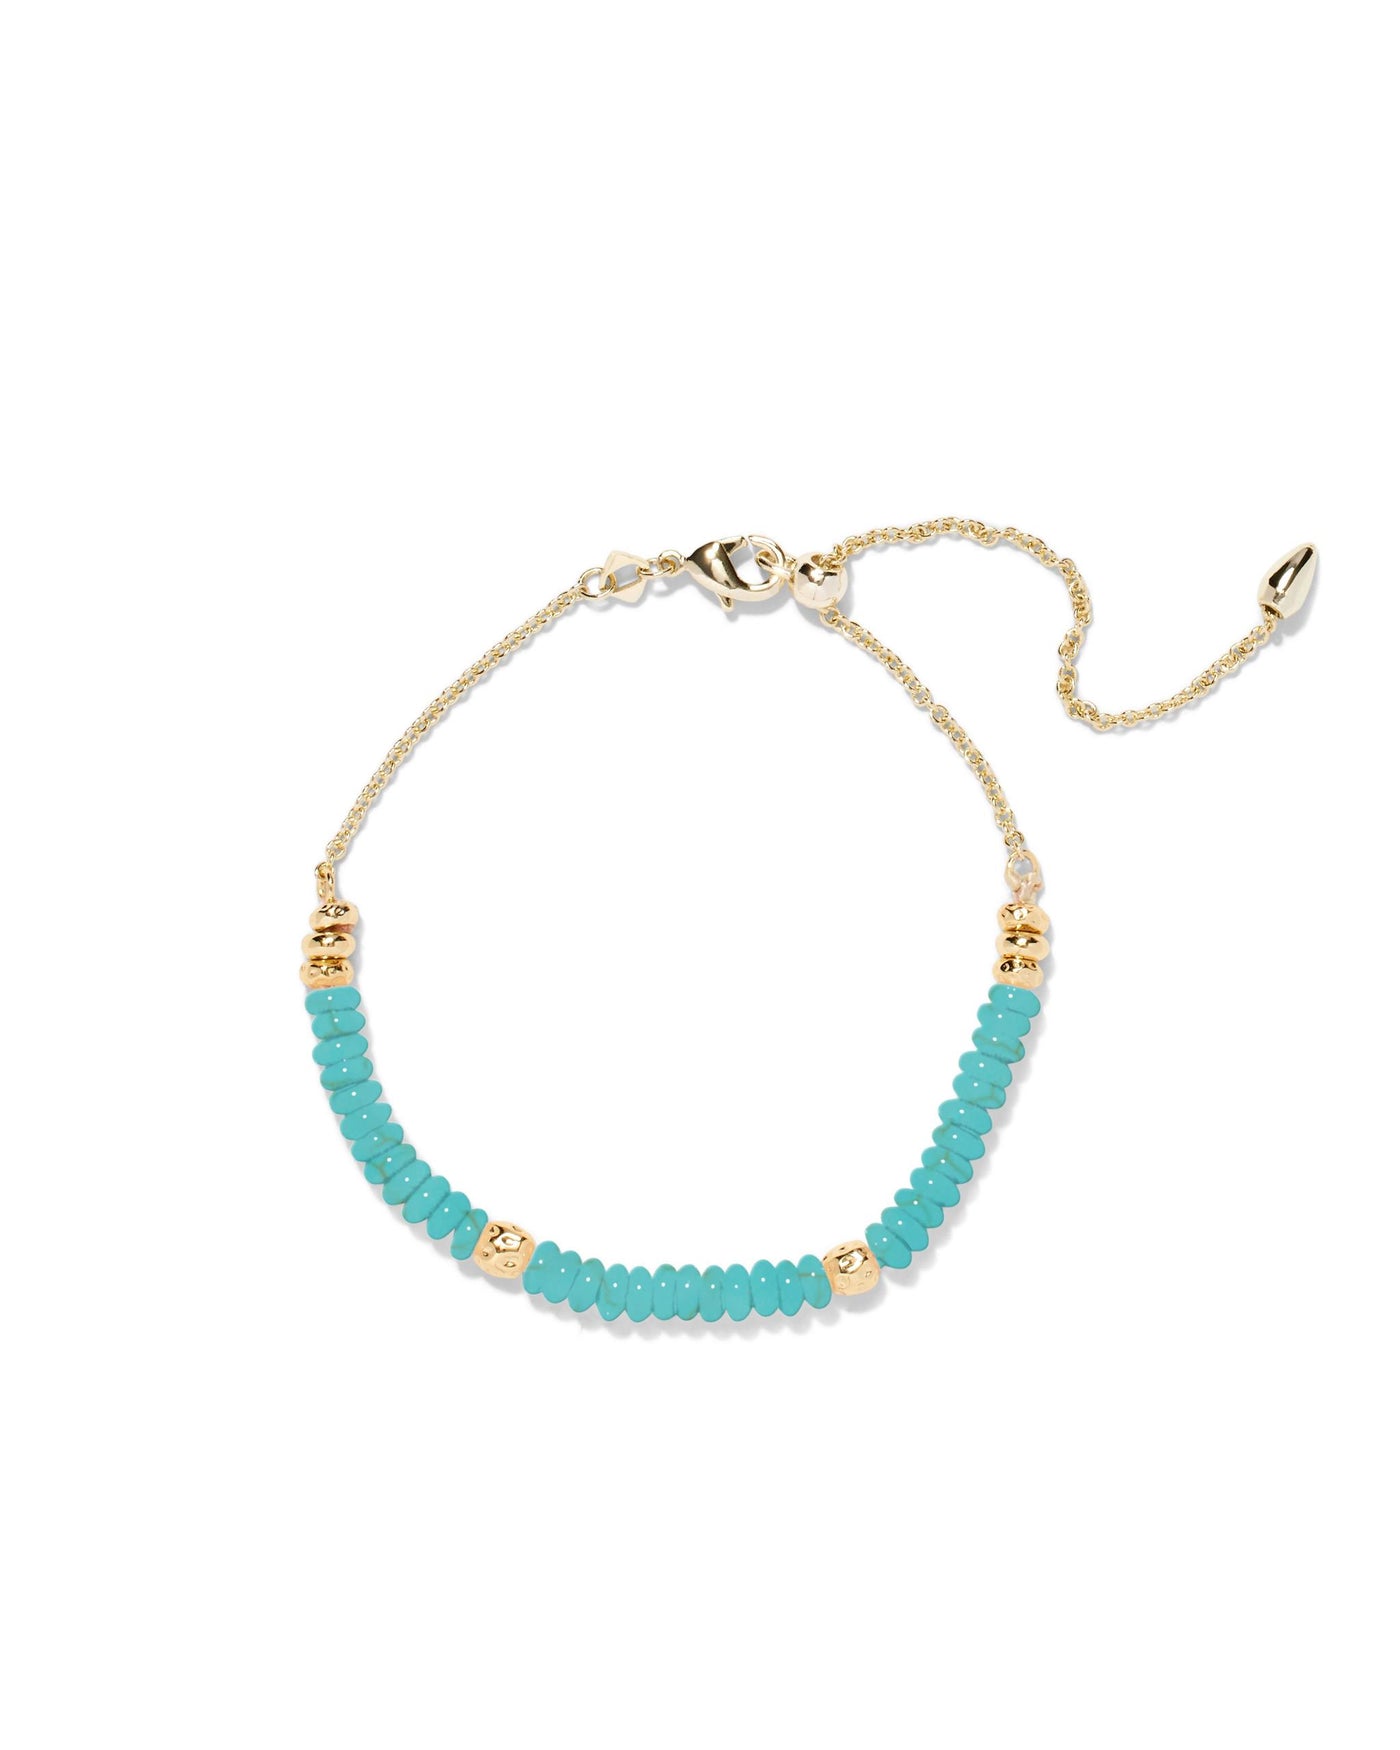 Gold Tone Bracelet Featuring Blue/Green Variegated Turquoise Magnesite by Kendra Scott